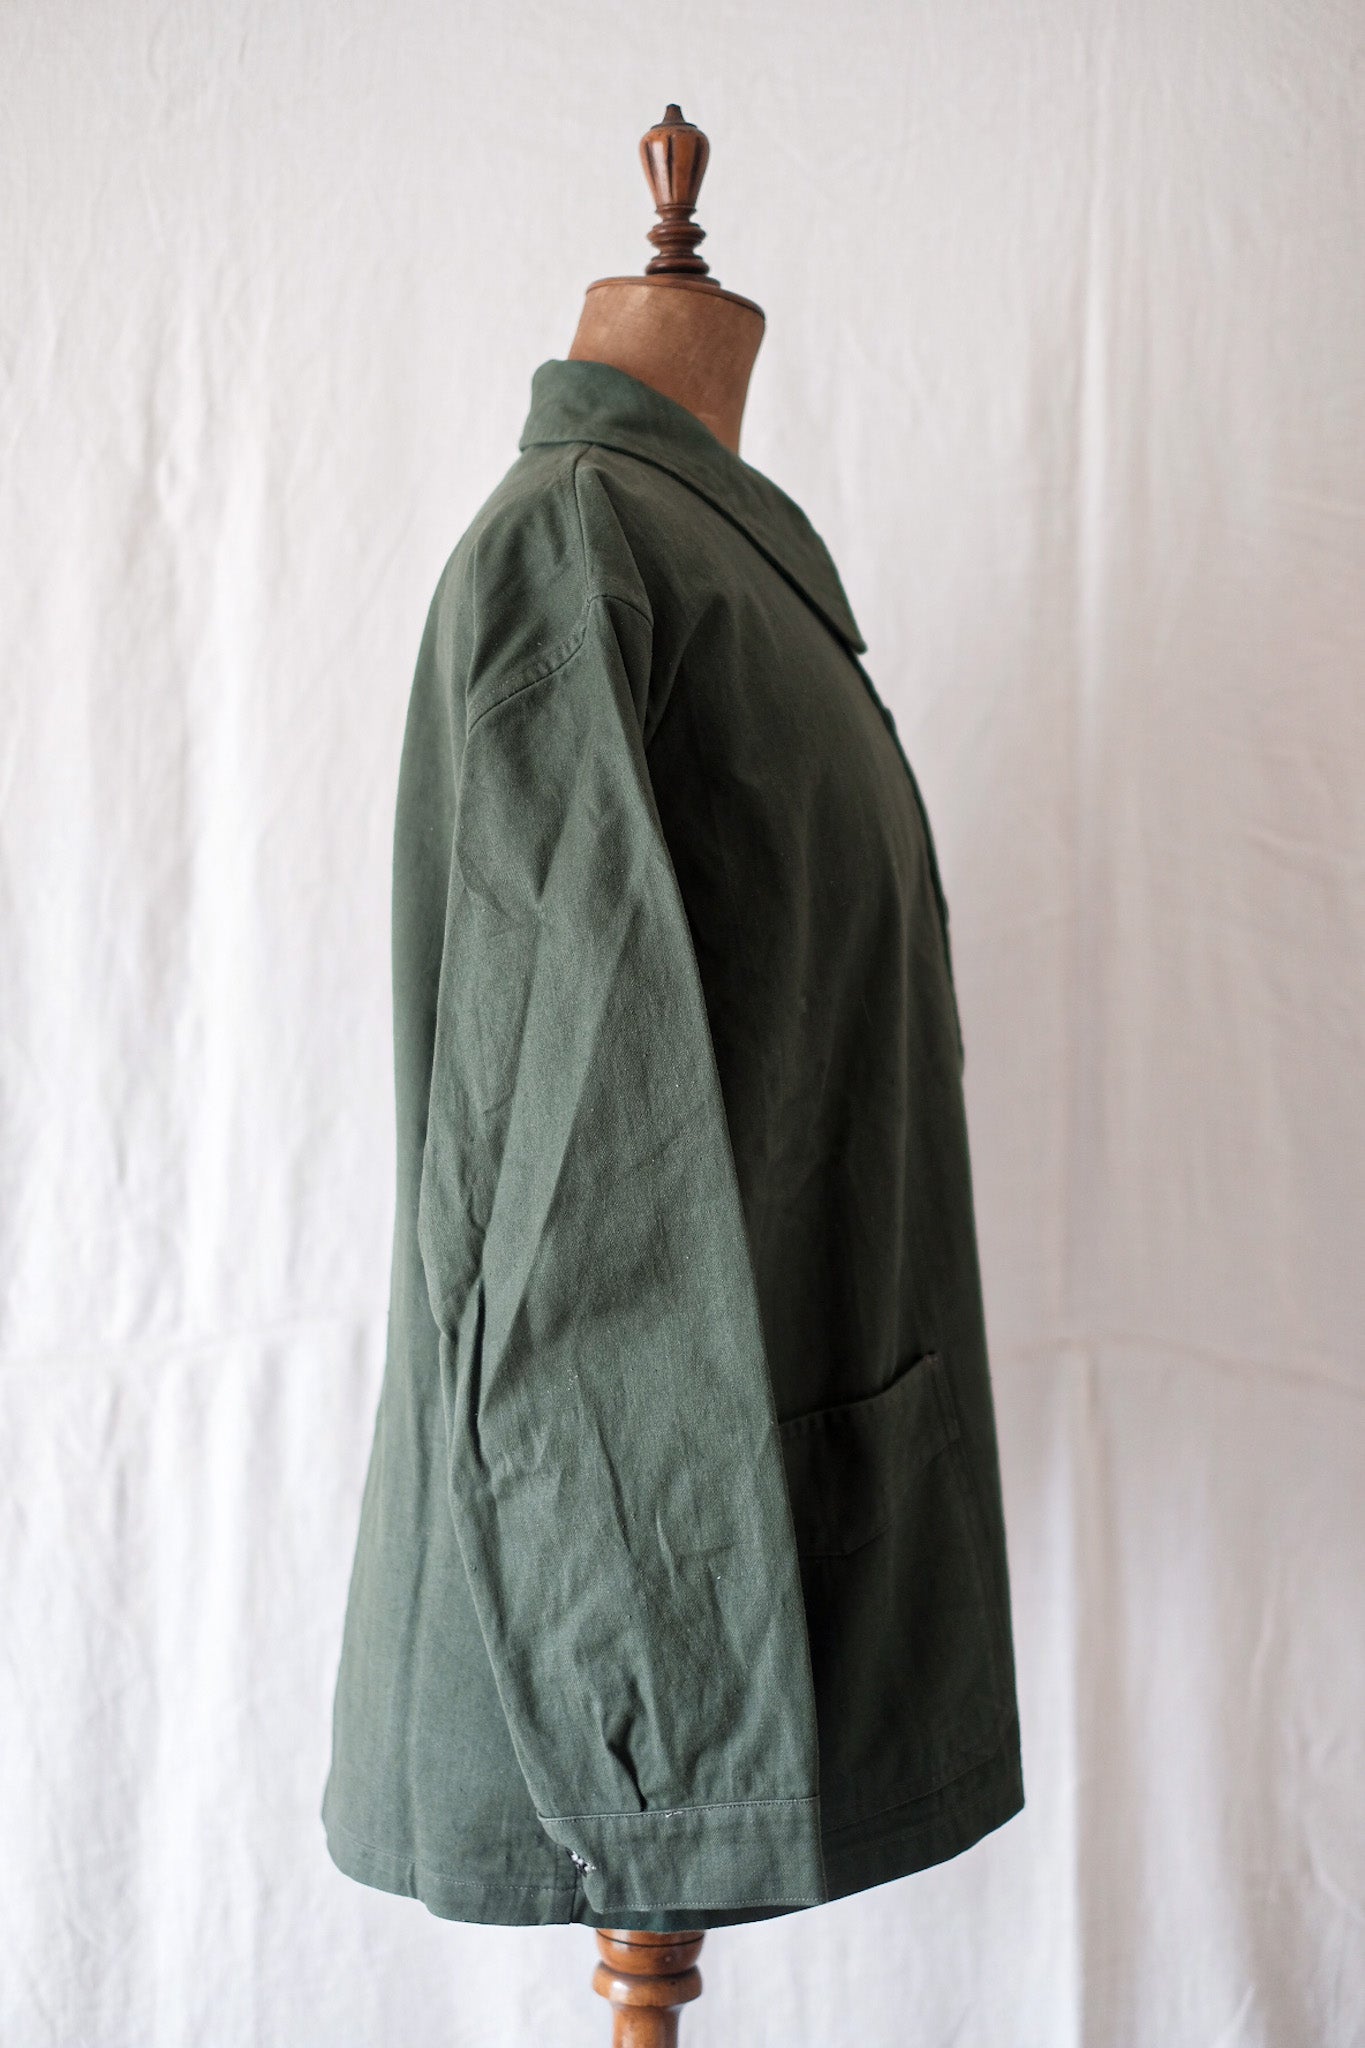 [~ 50's] French Army Bourgeron Jacket